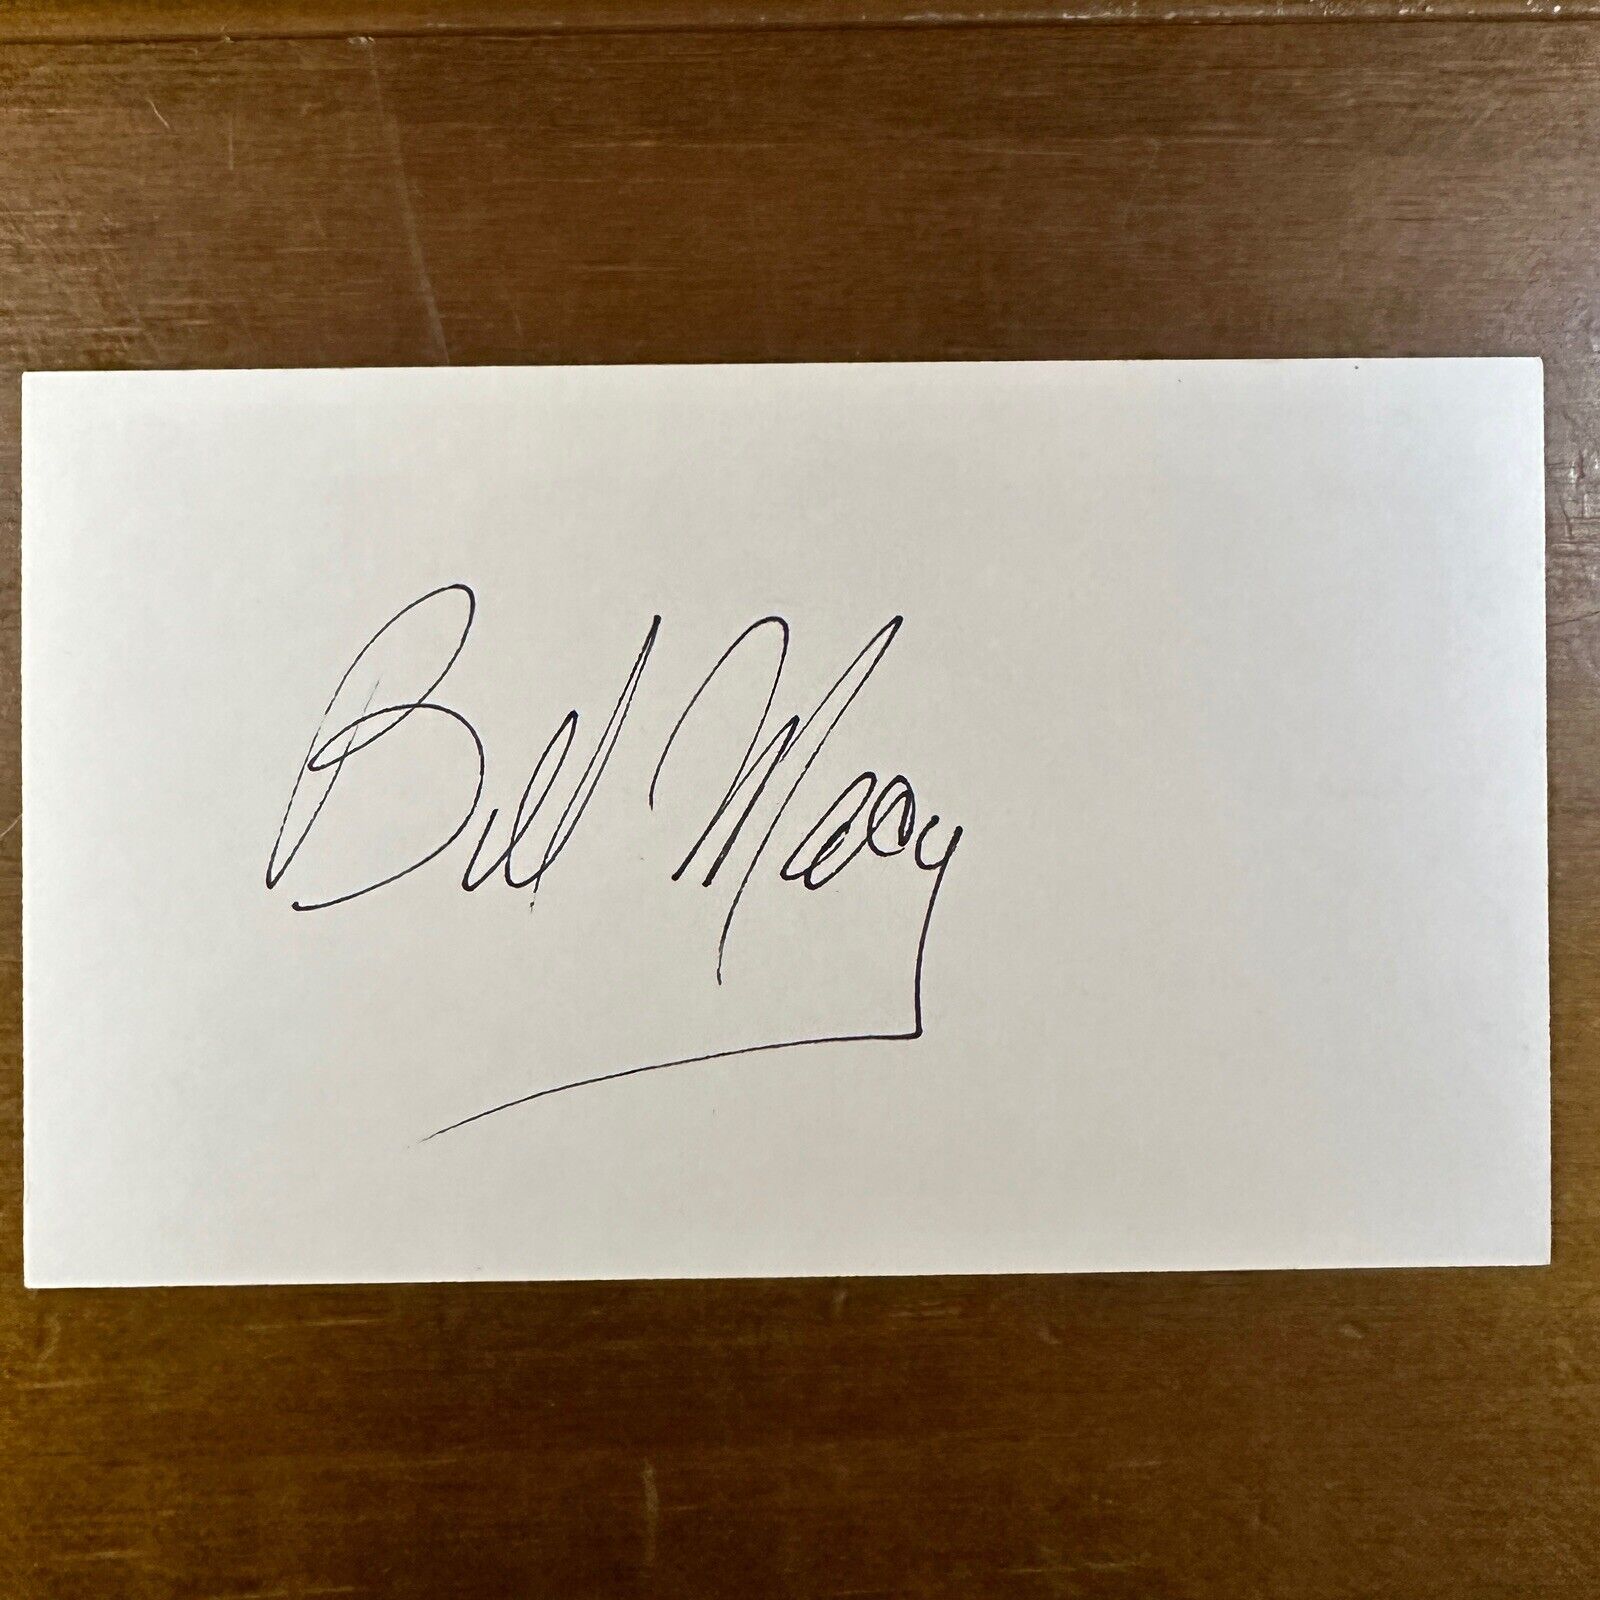 Bill Macy  Hand Signed 3x5 Index Card  Autograph